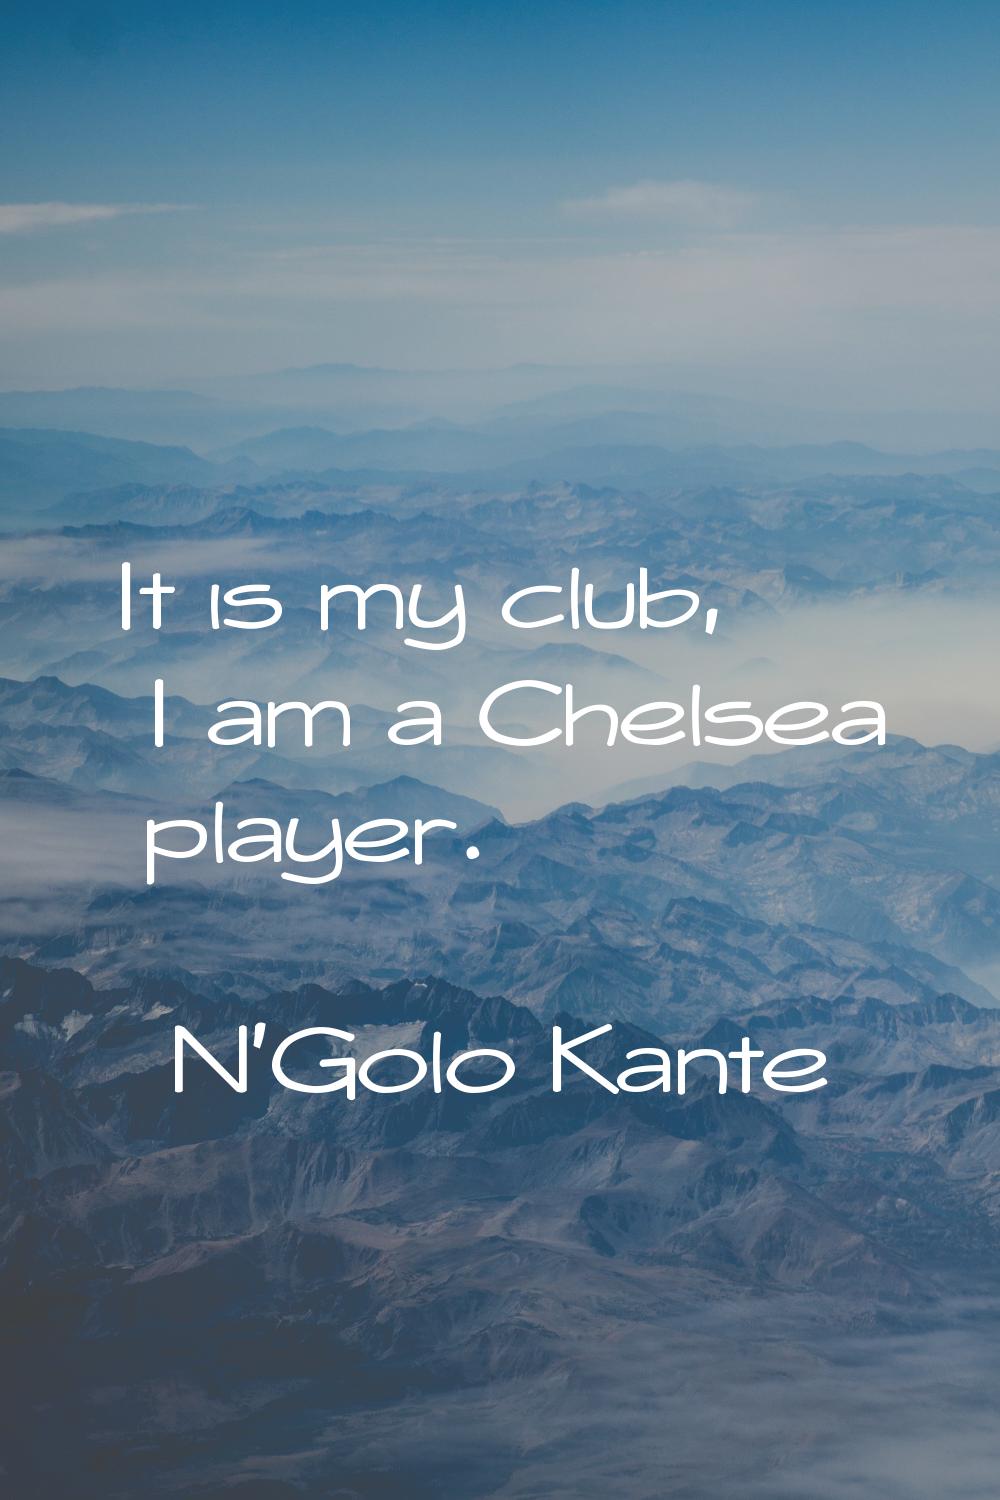 It is my club, I am a Chelsea player.